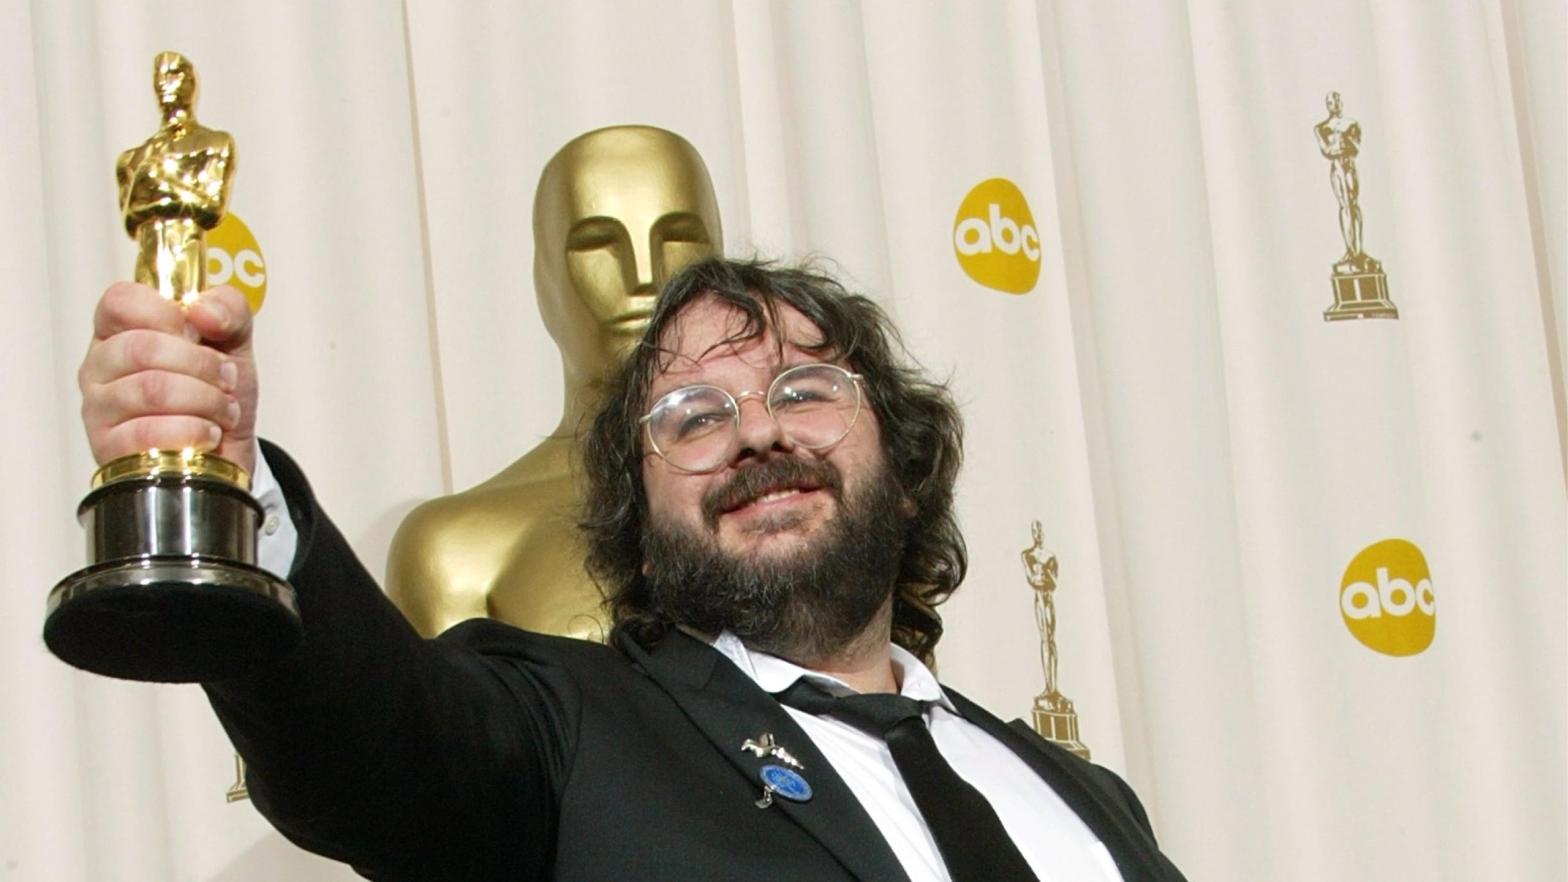 Peter Jackson holds aloft his Best Director Oscar for Return of the King at the 2004 Academy Awards. (Image: Frederick M. Brown, Getty Images)